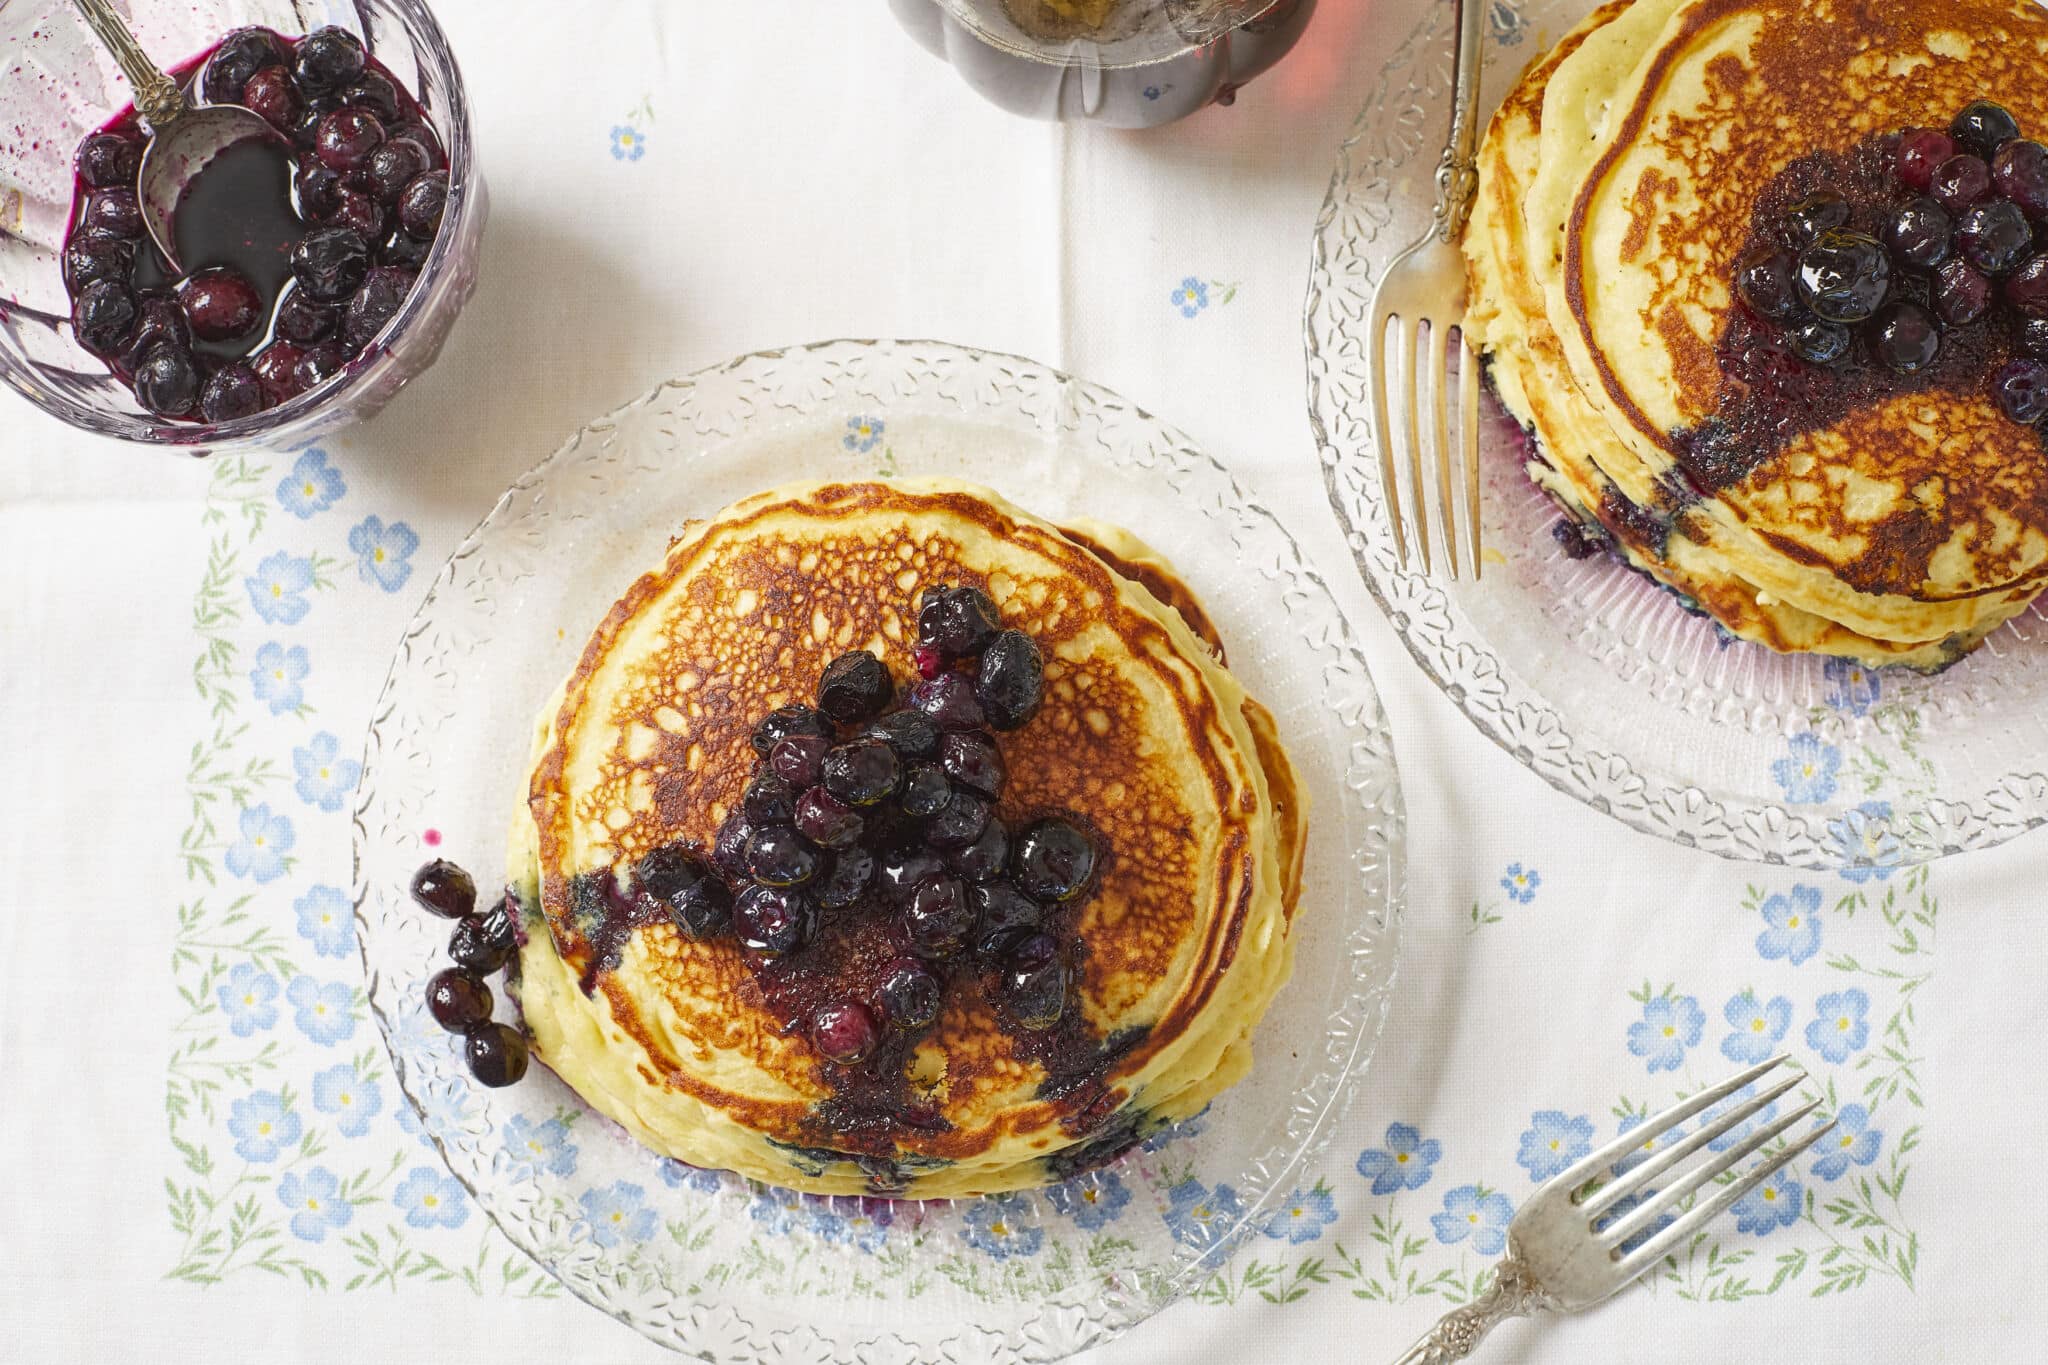 Two stacks of thick, fluffy and soft lemon ricotta pancakes topped with juicy sweet macerated blueberries, served on glass plates and ready to enjoy.